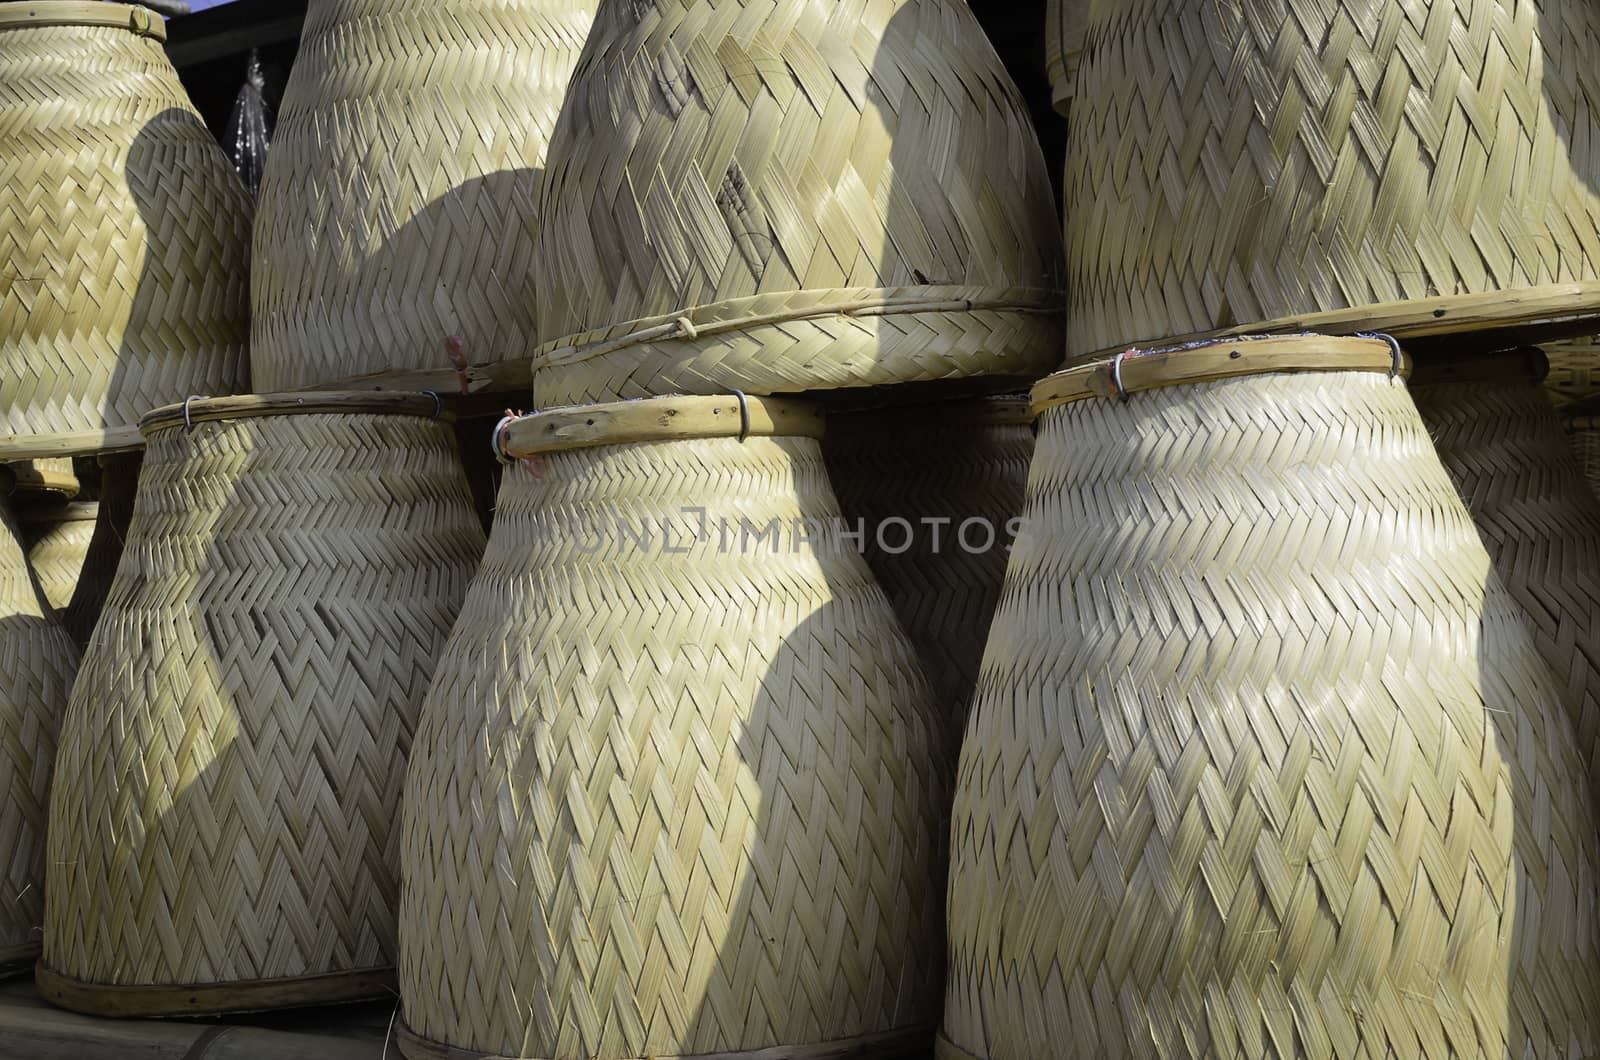 The handmade basketwork use for sticky rice steaming made from bamboo.